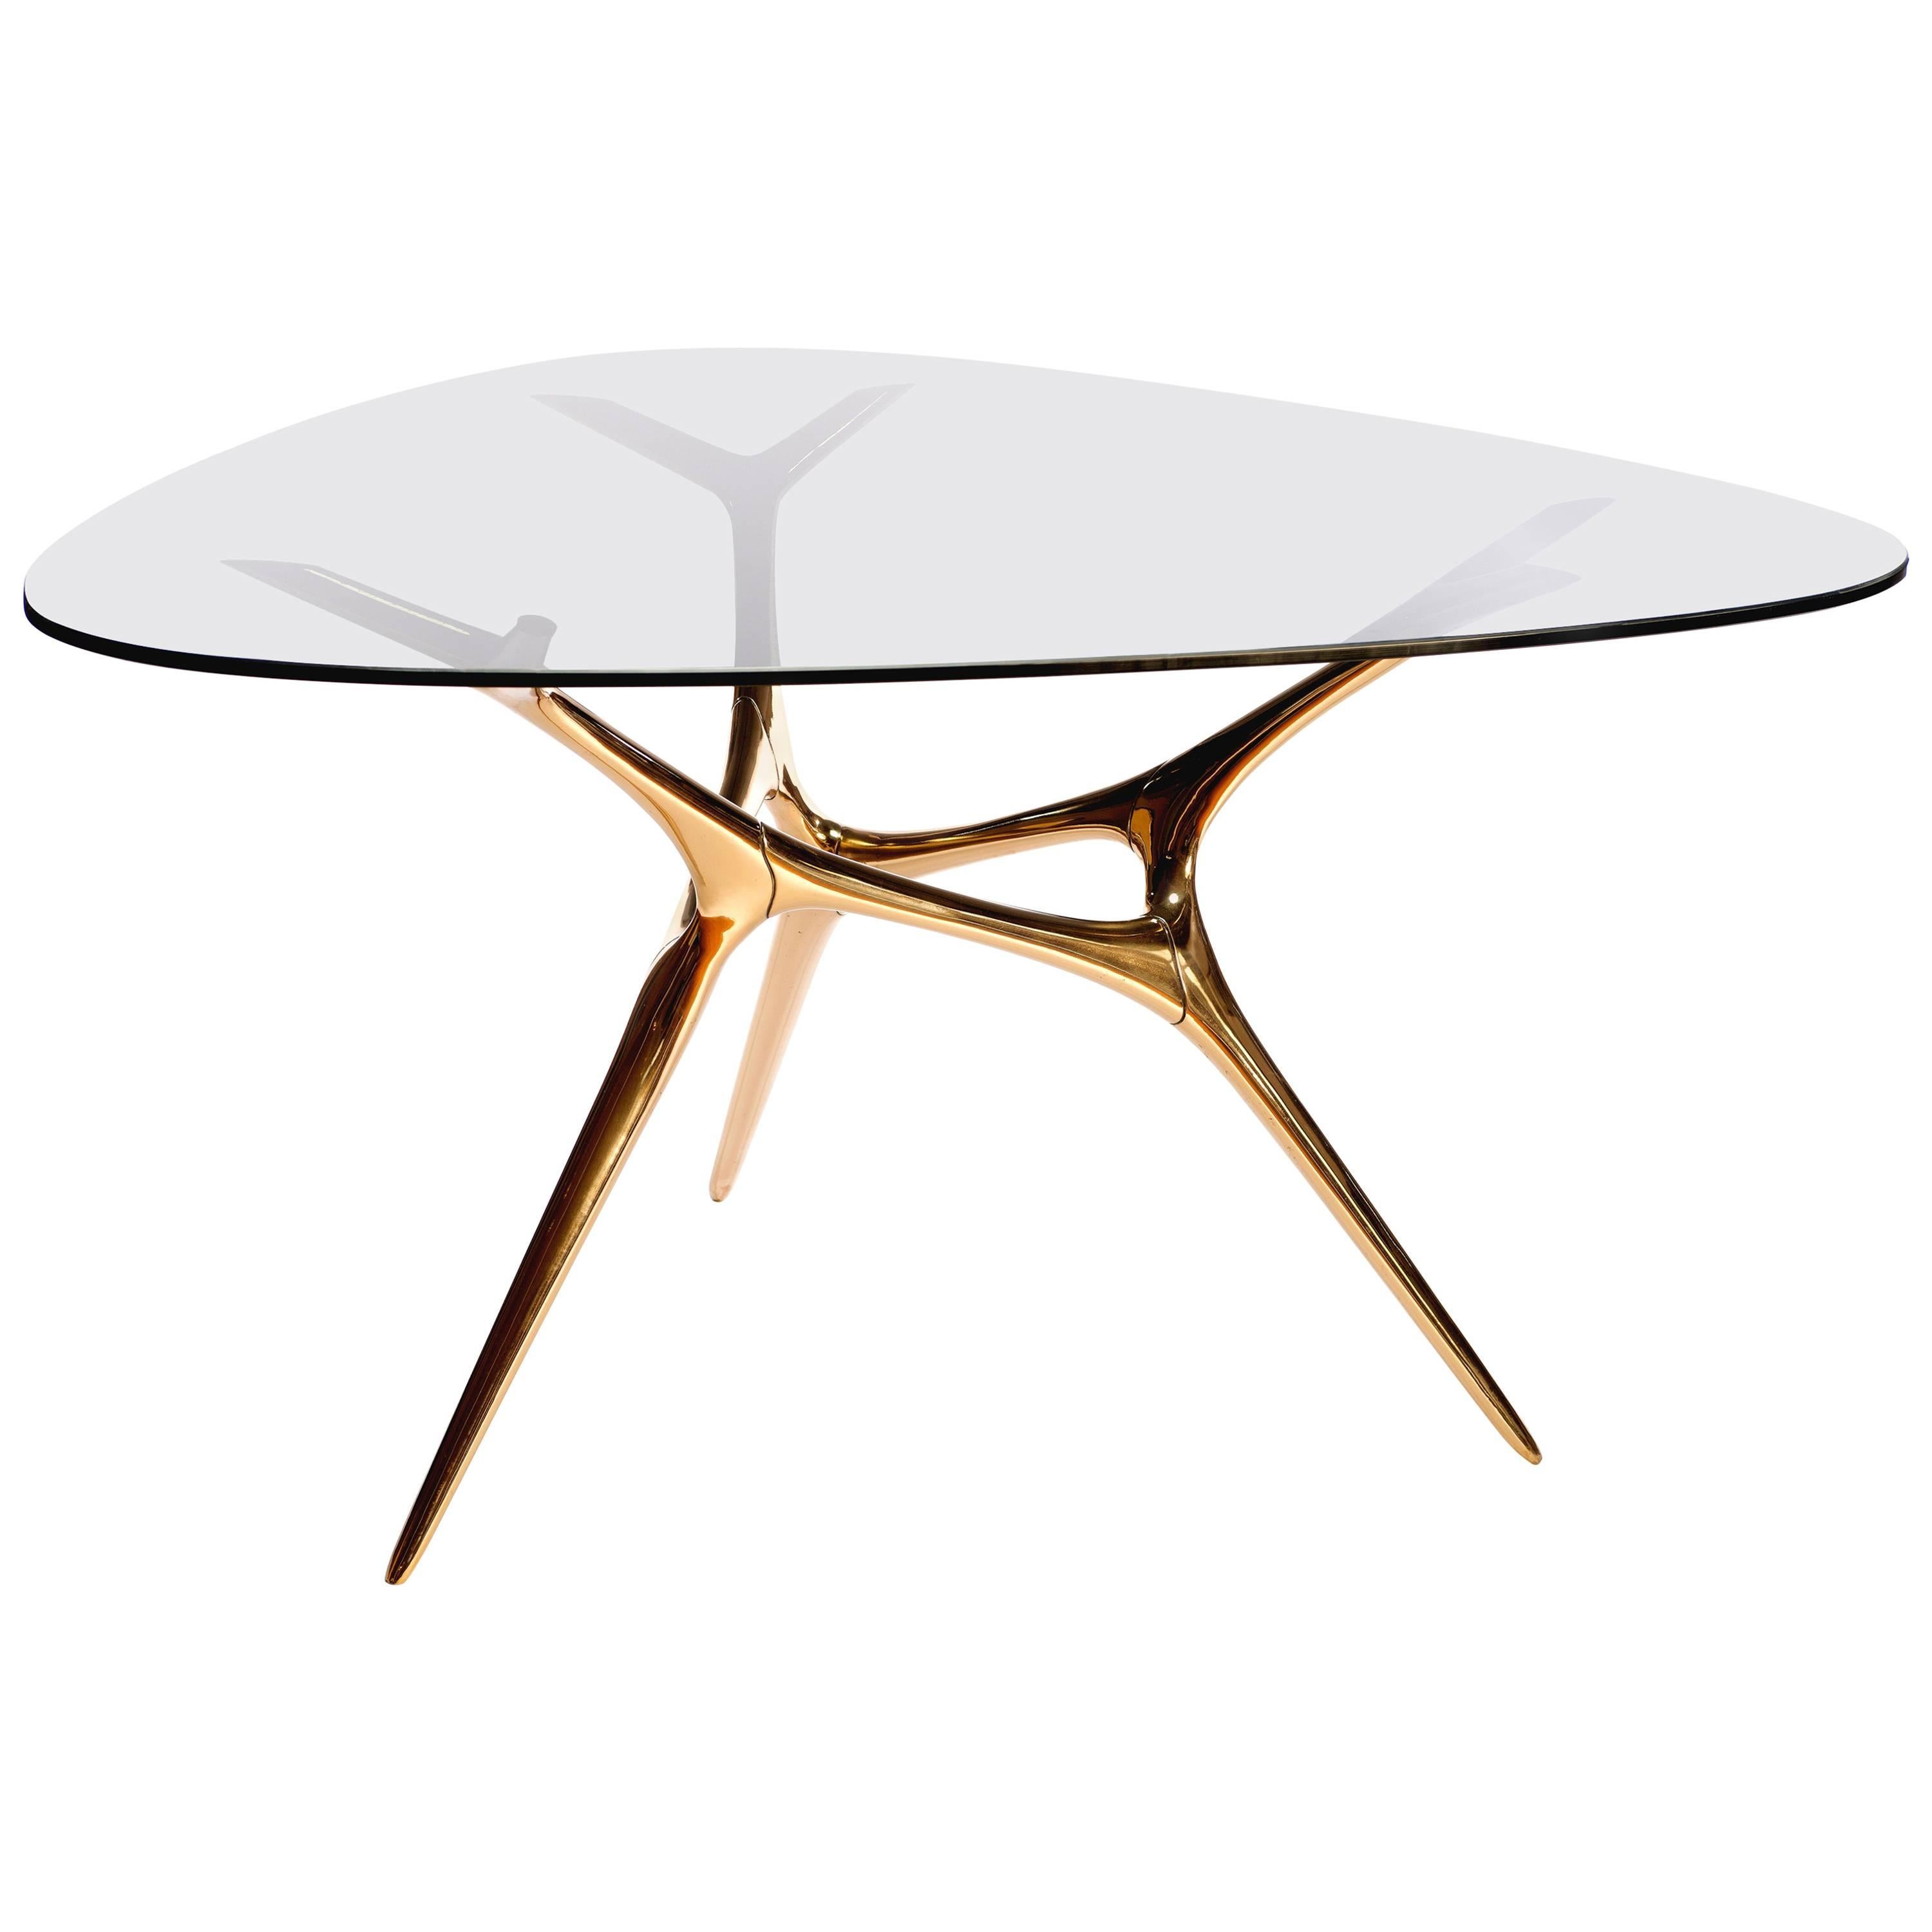 E-Volved Table in Polished Bronze and Etched Glass by Timothy Schreiber